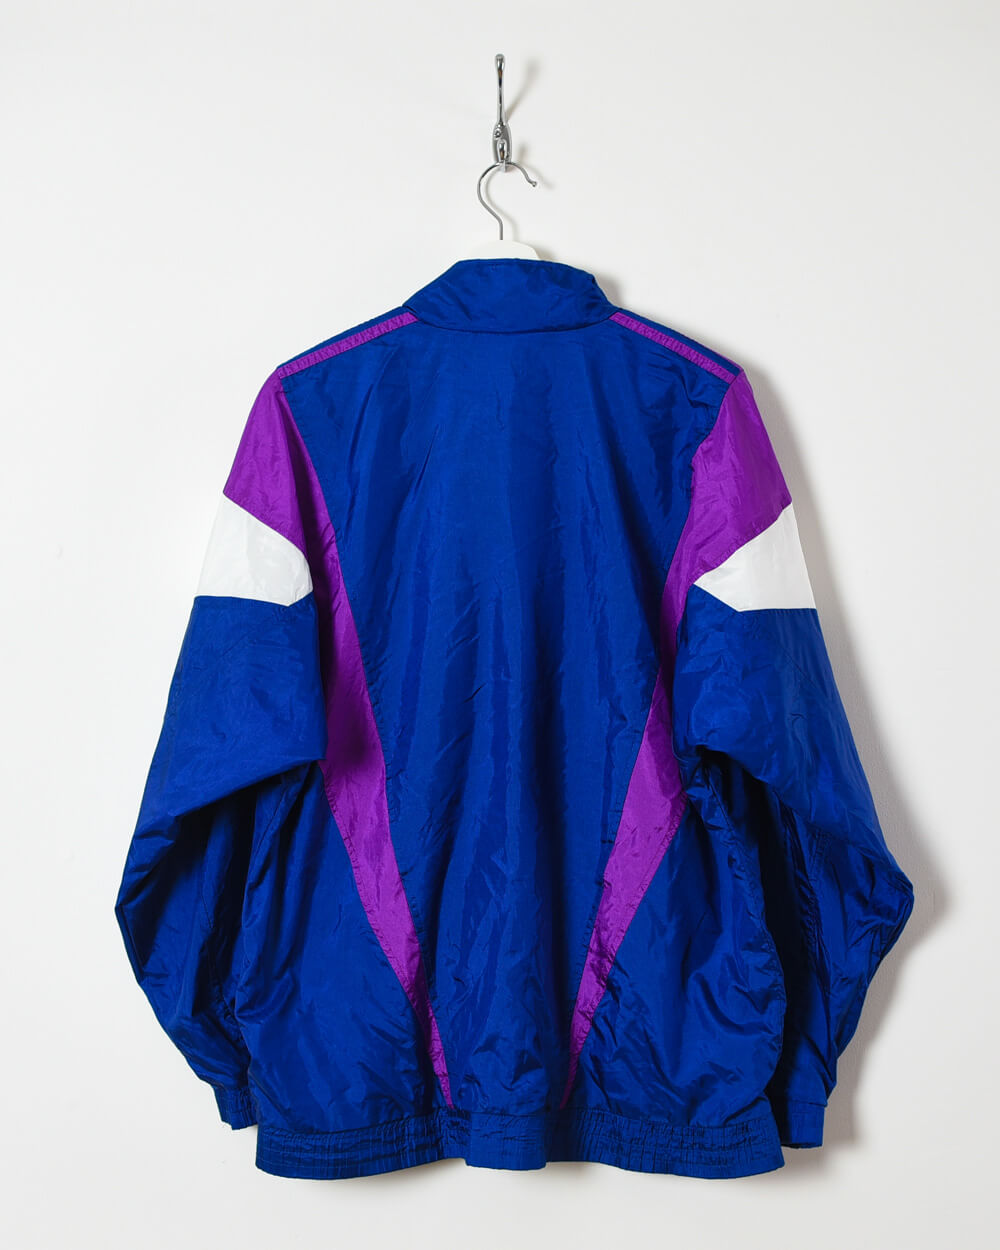 Adidas Full Shell Suit - Medium - Domno Vintage 90s, 80s, 00s Retro and Vintage Clothing 